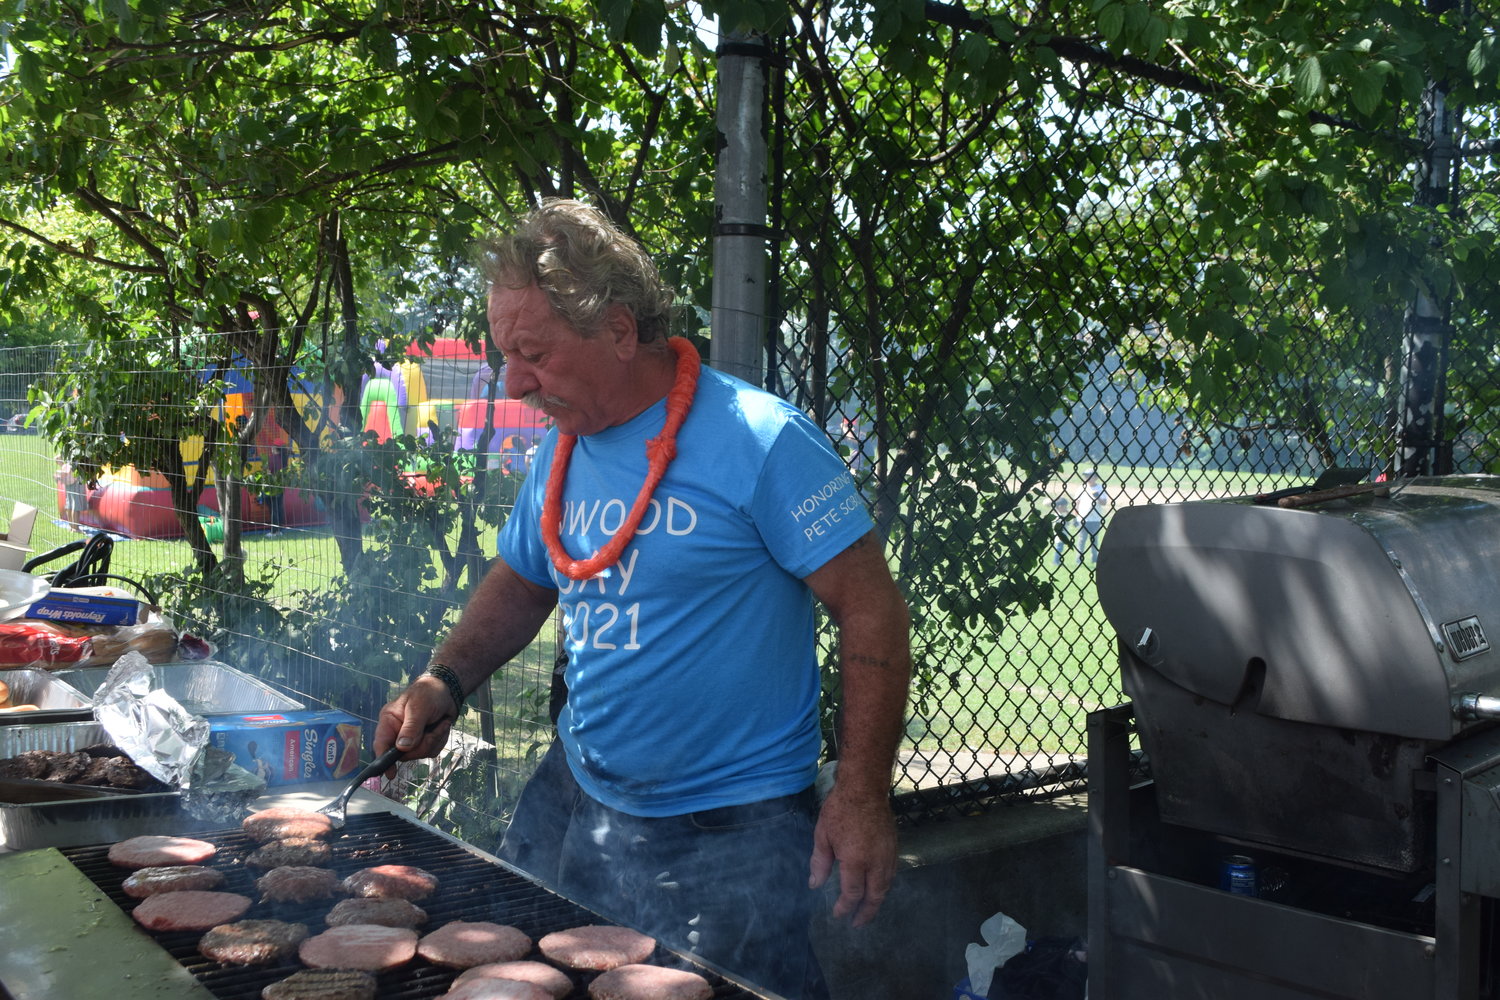 Tony Nave was at the grill all day cooking the hamburgers.